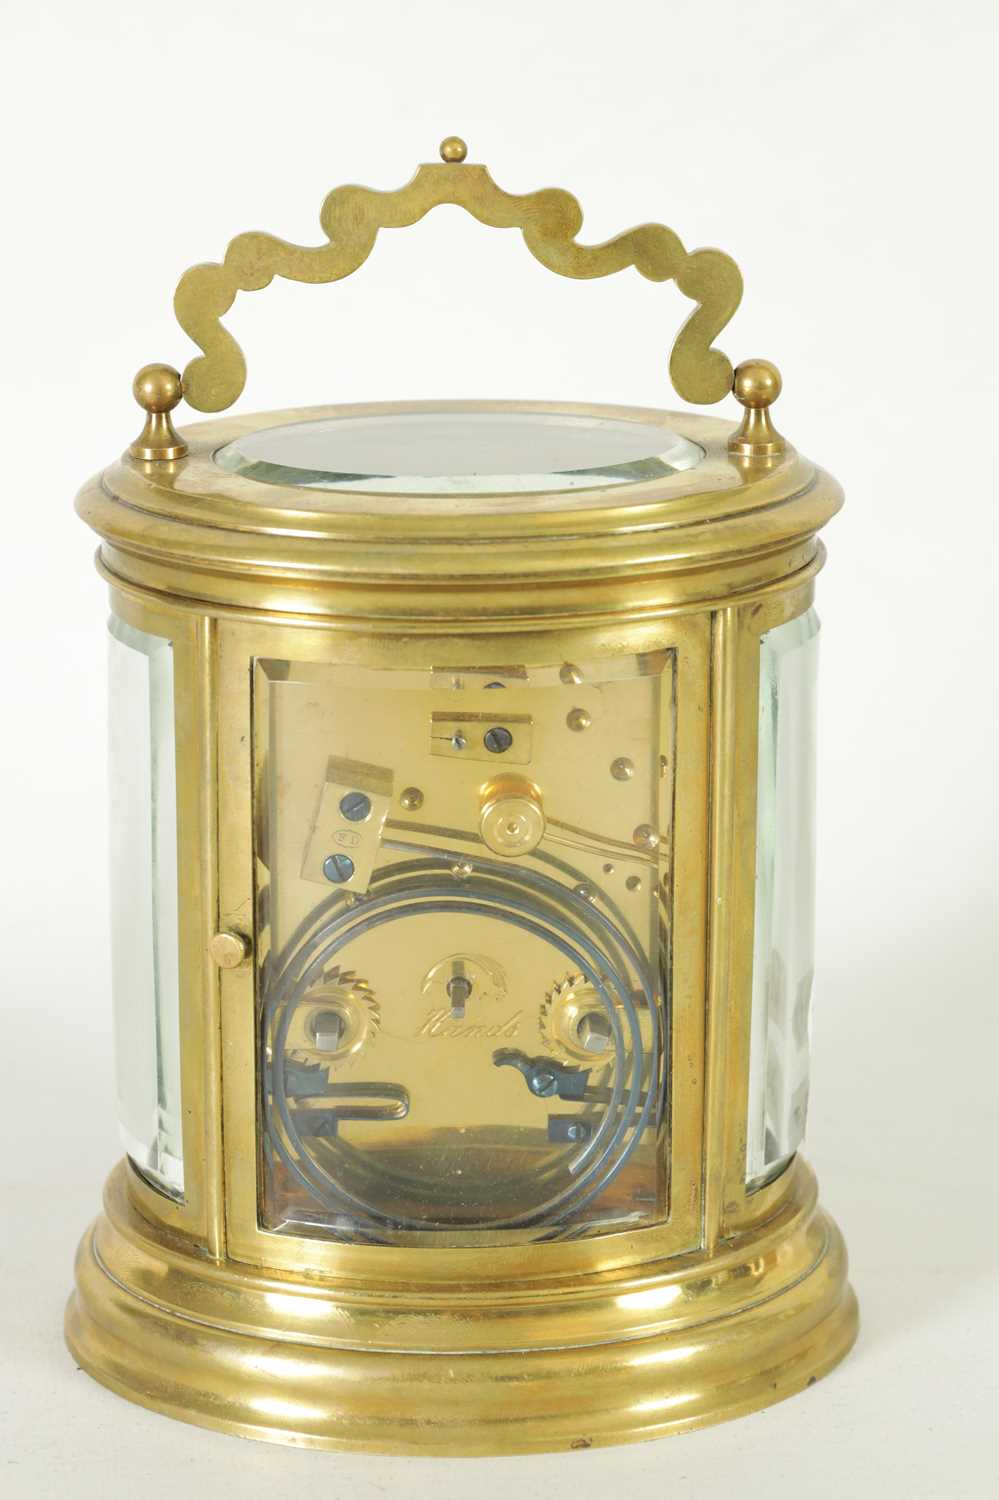 A LATE 19TH CENTURY OVAL REPEATING FRENCH CARRIAGE CLOCK - Image 7 of 9